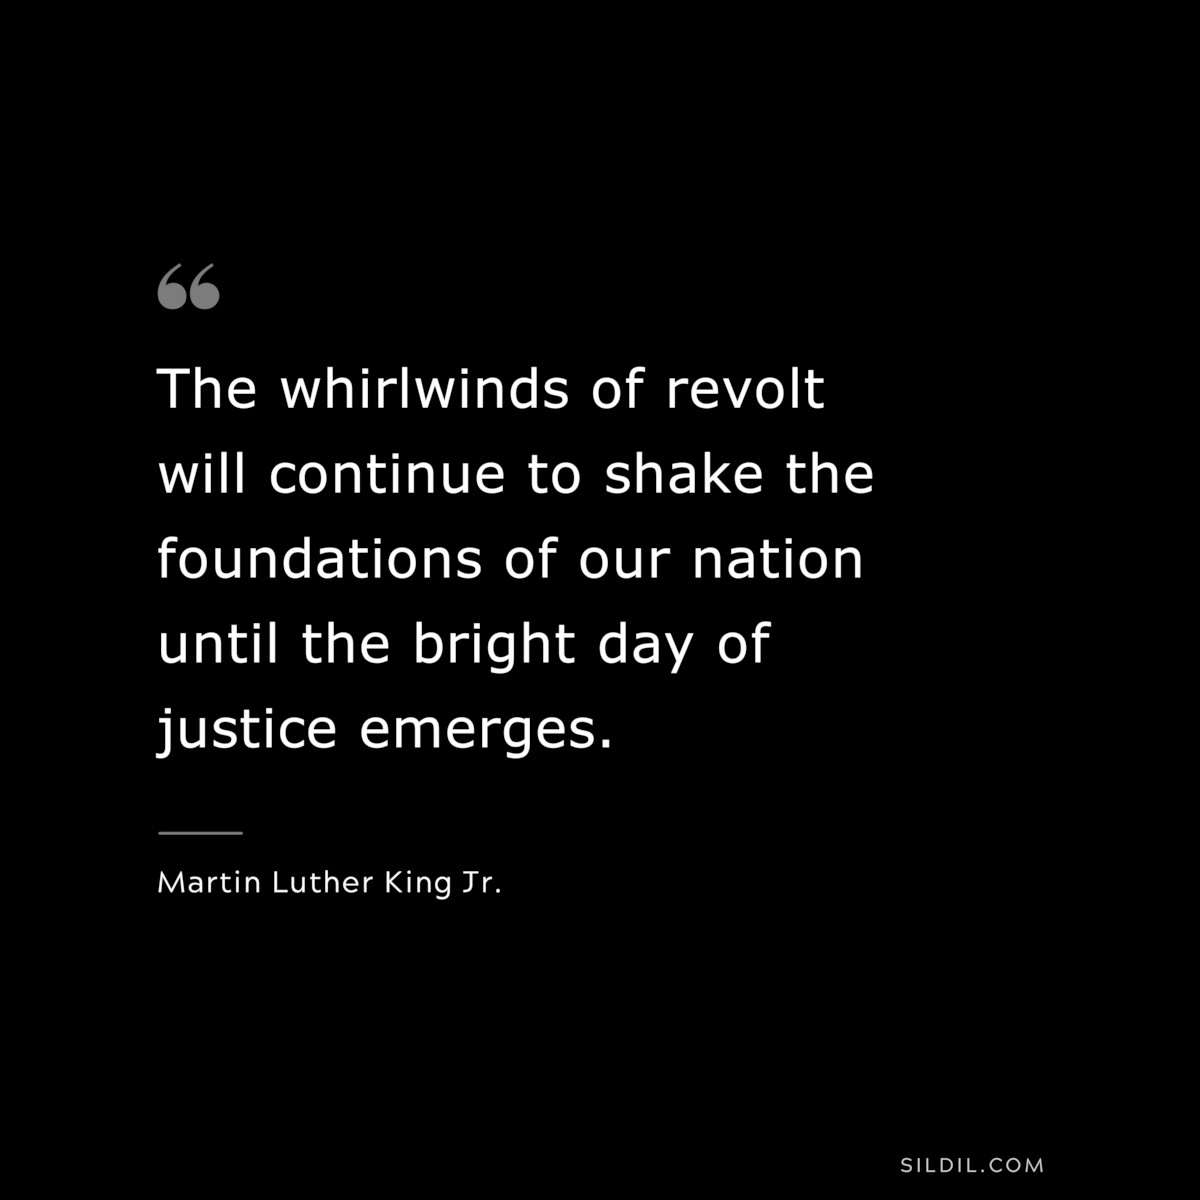 The whirlwinds of revolt will continue to shake the foundations of our nation until the bright day of justice emerges. ― Martin Luther King Jr.